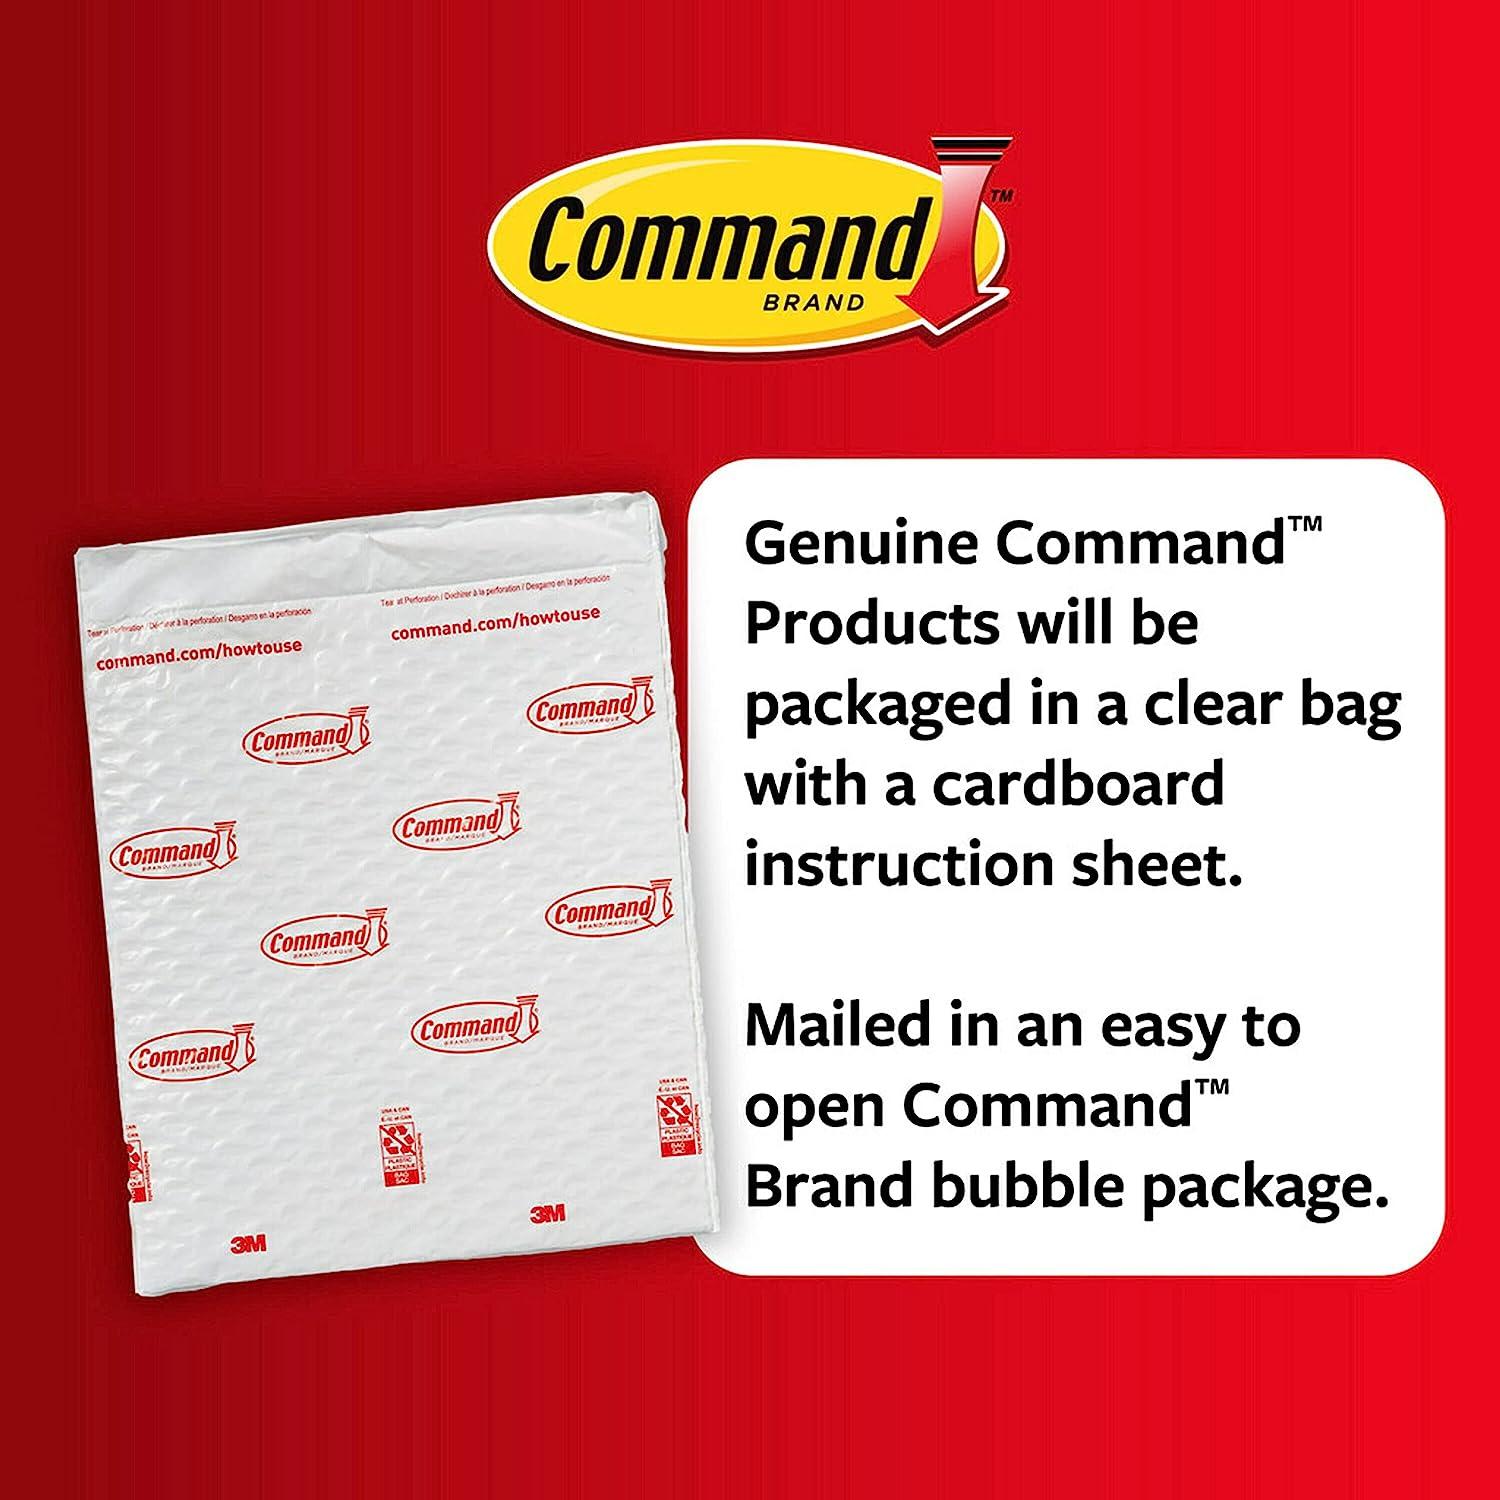 Command Picture Hangers, Sawtooth, Value Pack